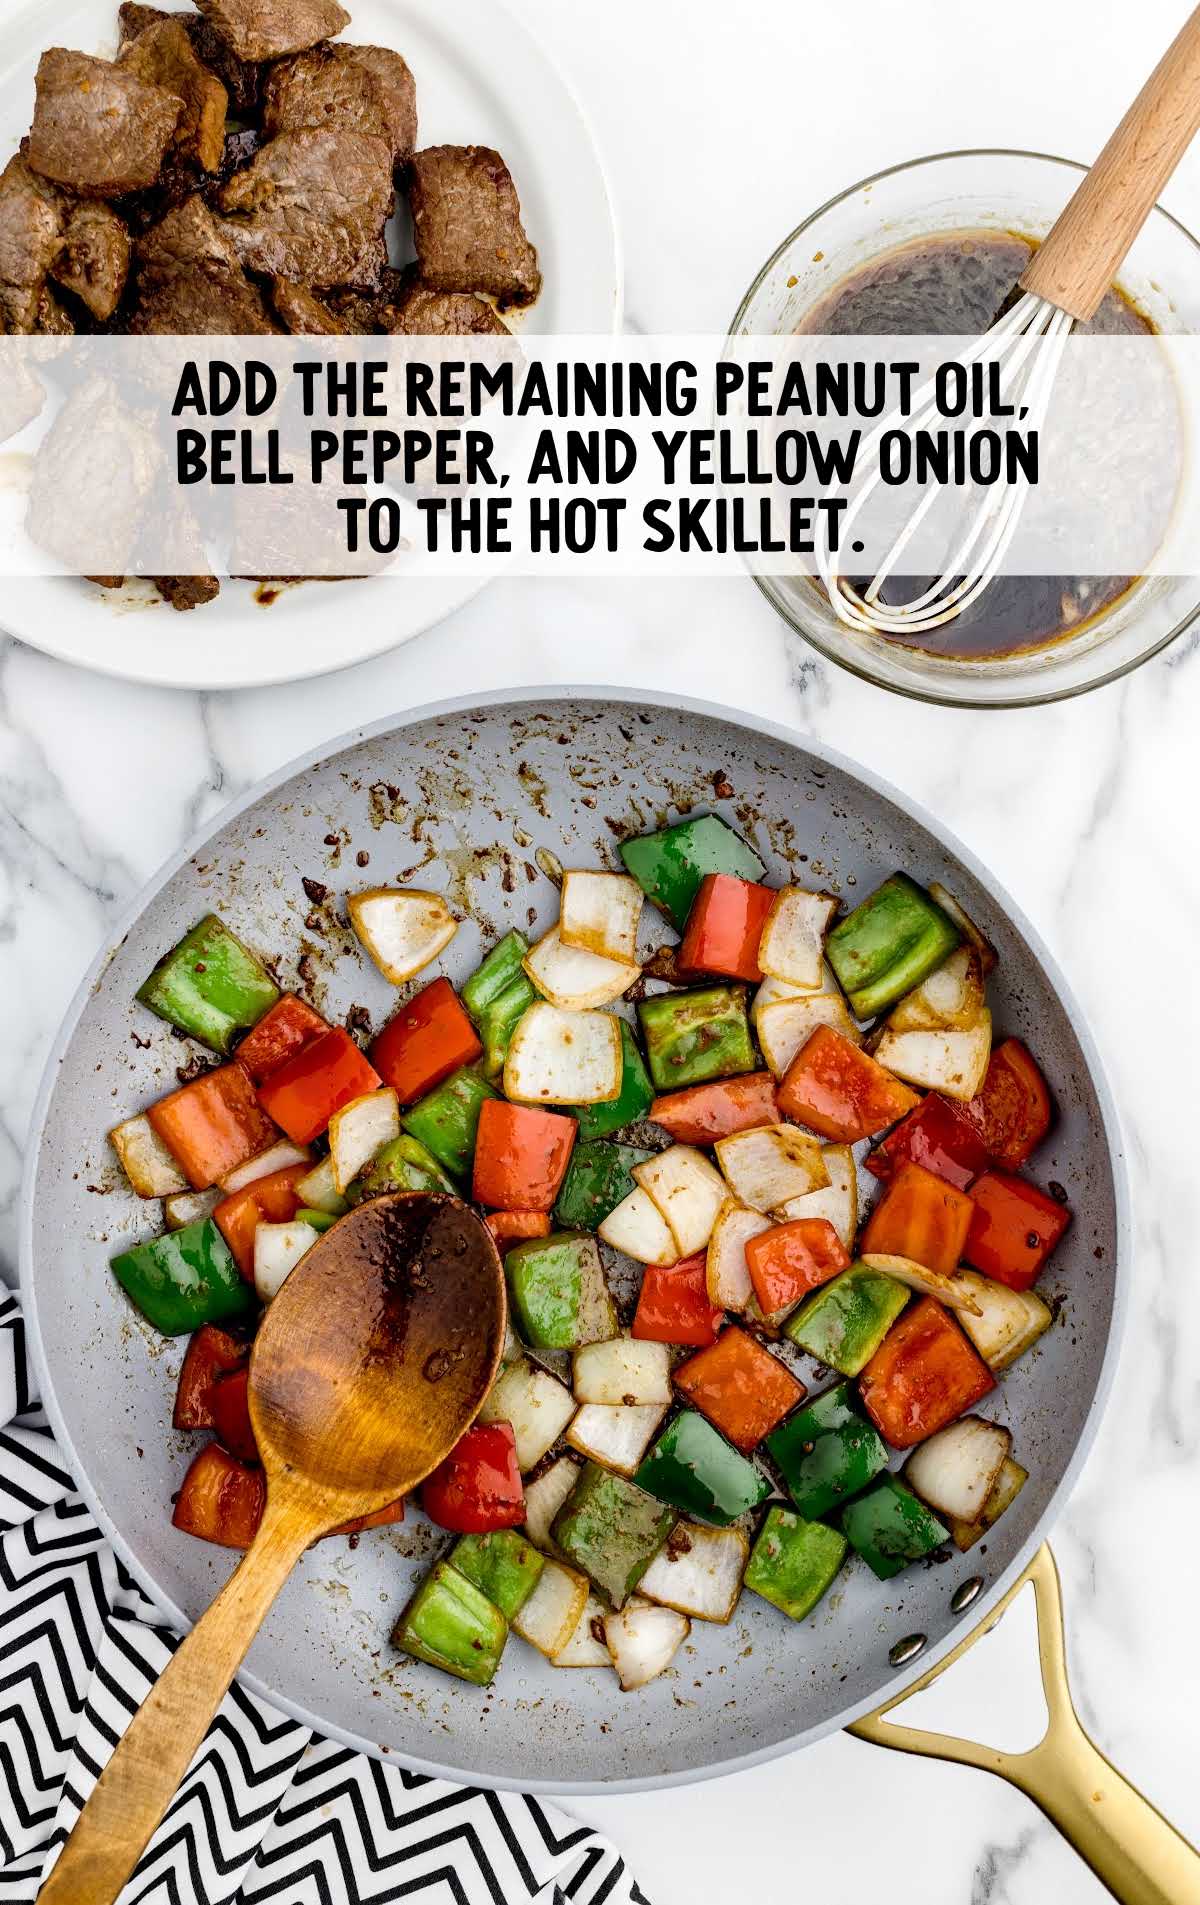 peanut oil, bell pepper, yellow onion, added to skillet